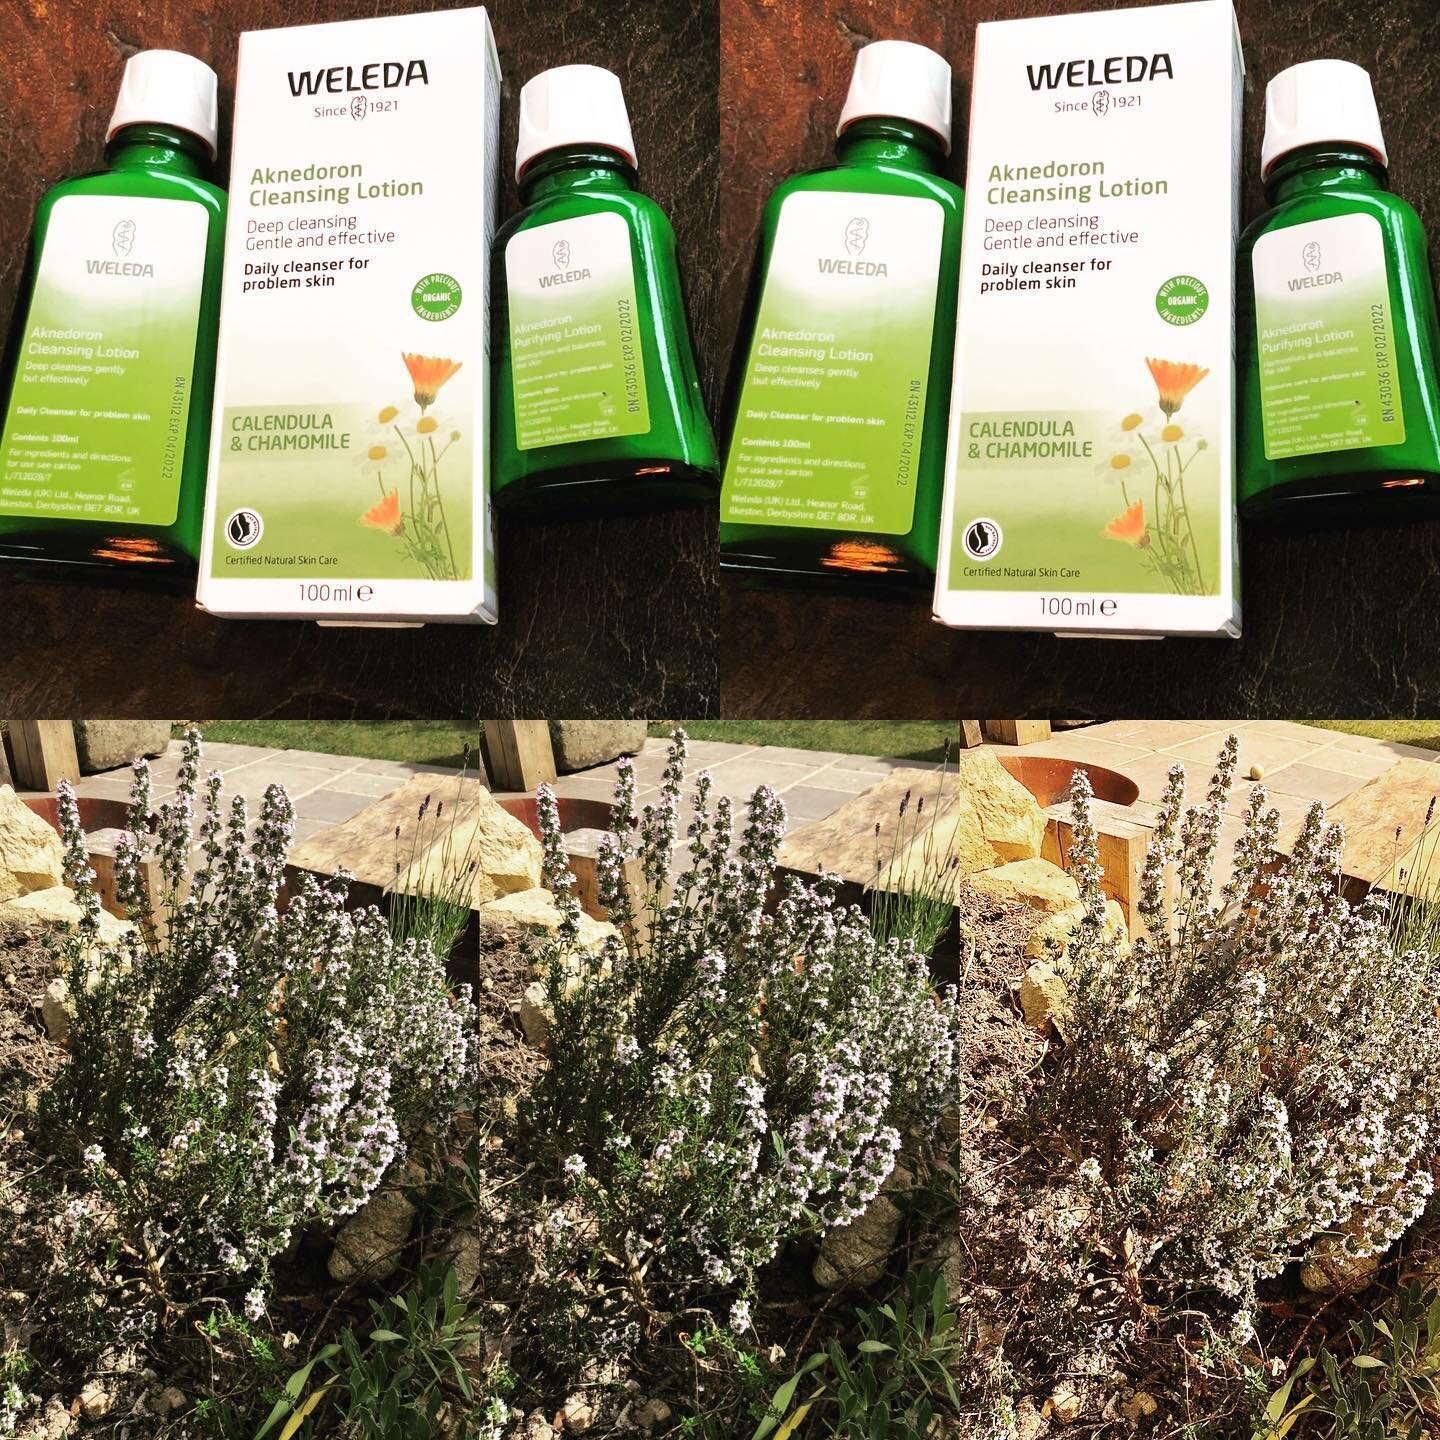 Thyme - Bees just loving our Wild Thyme in our garden - it&rsquo;s the Lead plant in Weleda&rsquo;s Aknedoron (gift for Acne) Cleansing and Purifying lotion. Helpful tip when cleansing put about half a capful of the cleansing lotion in a bowl of stea